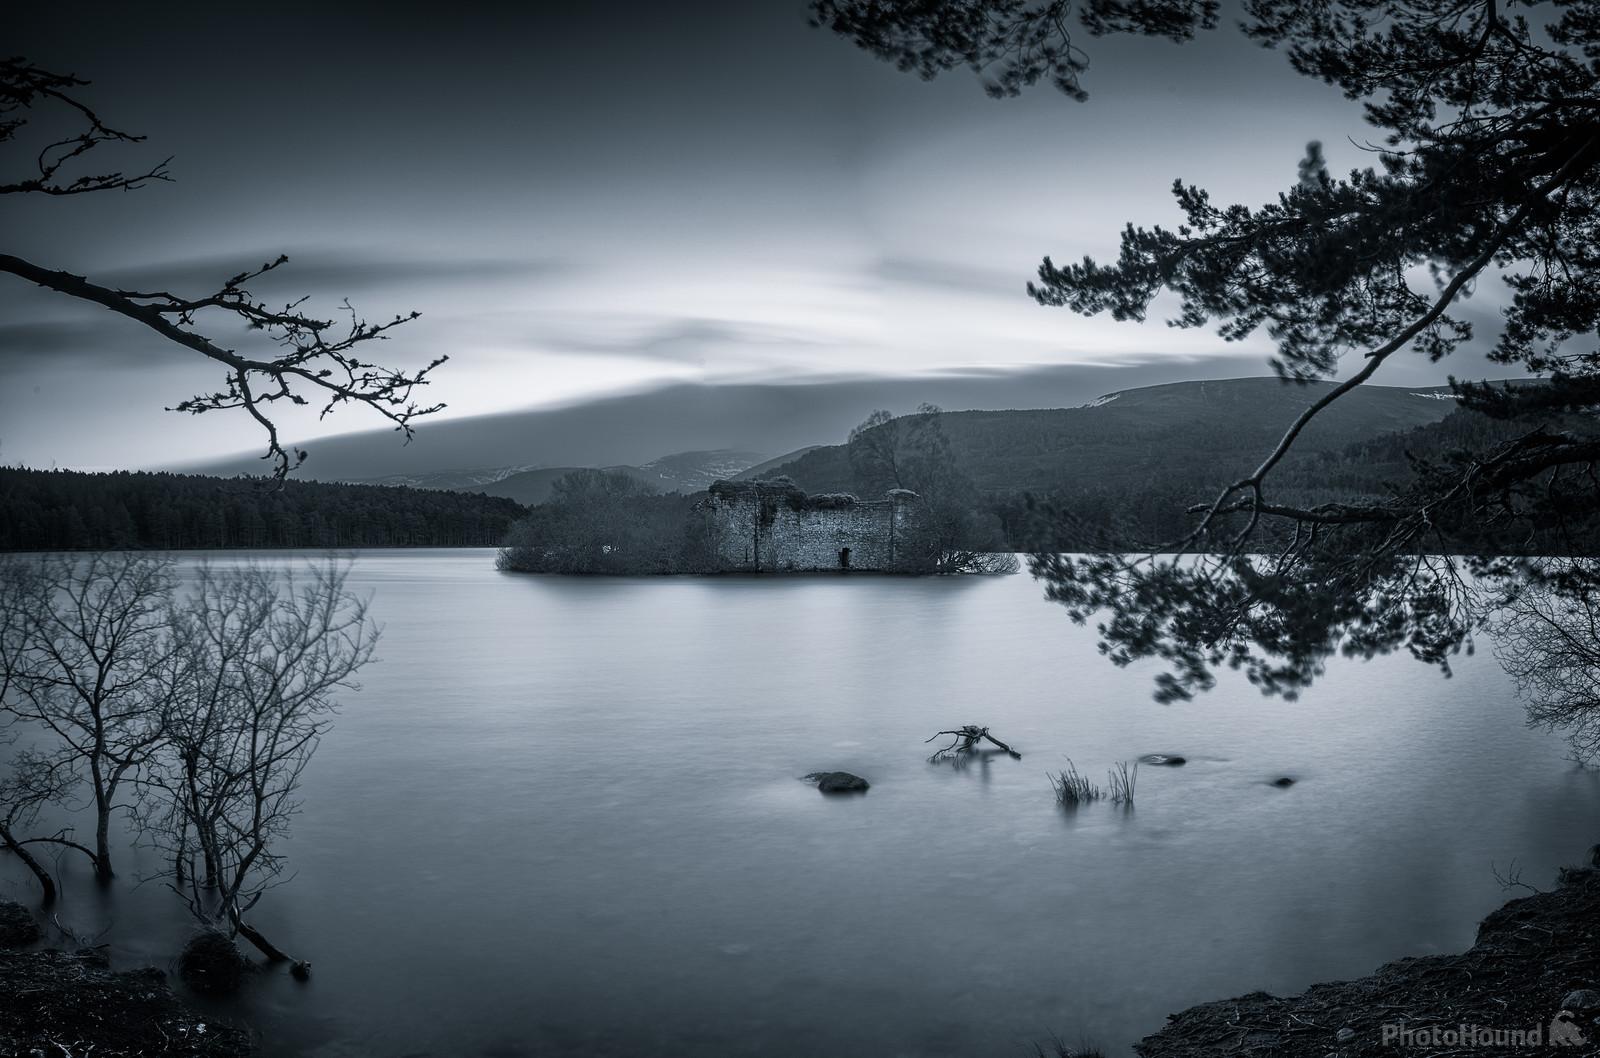 Image of Loch an Eilein by Richard Lizzimore